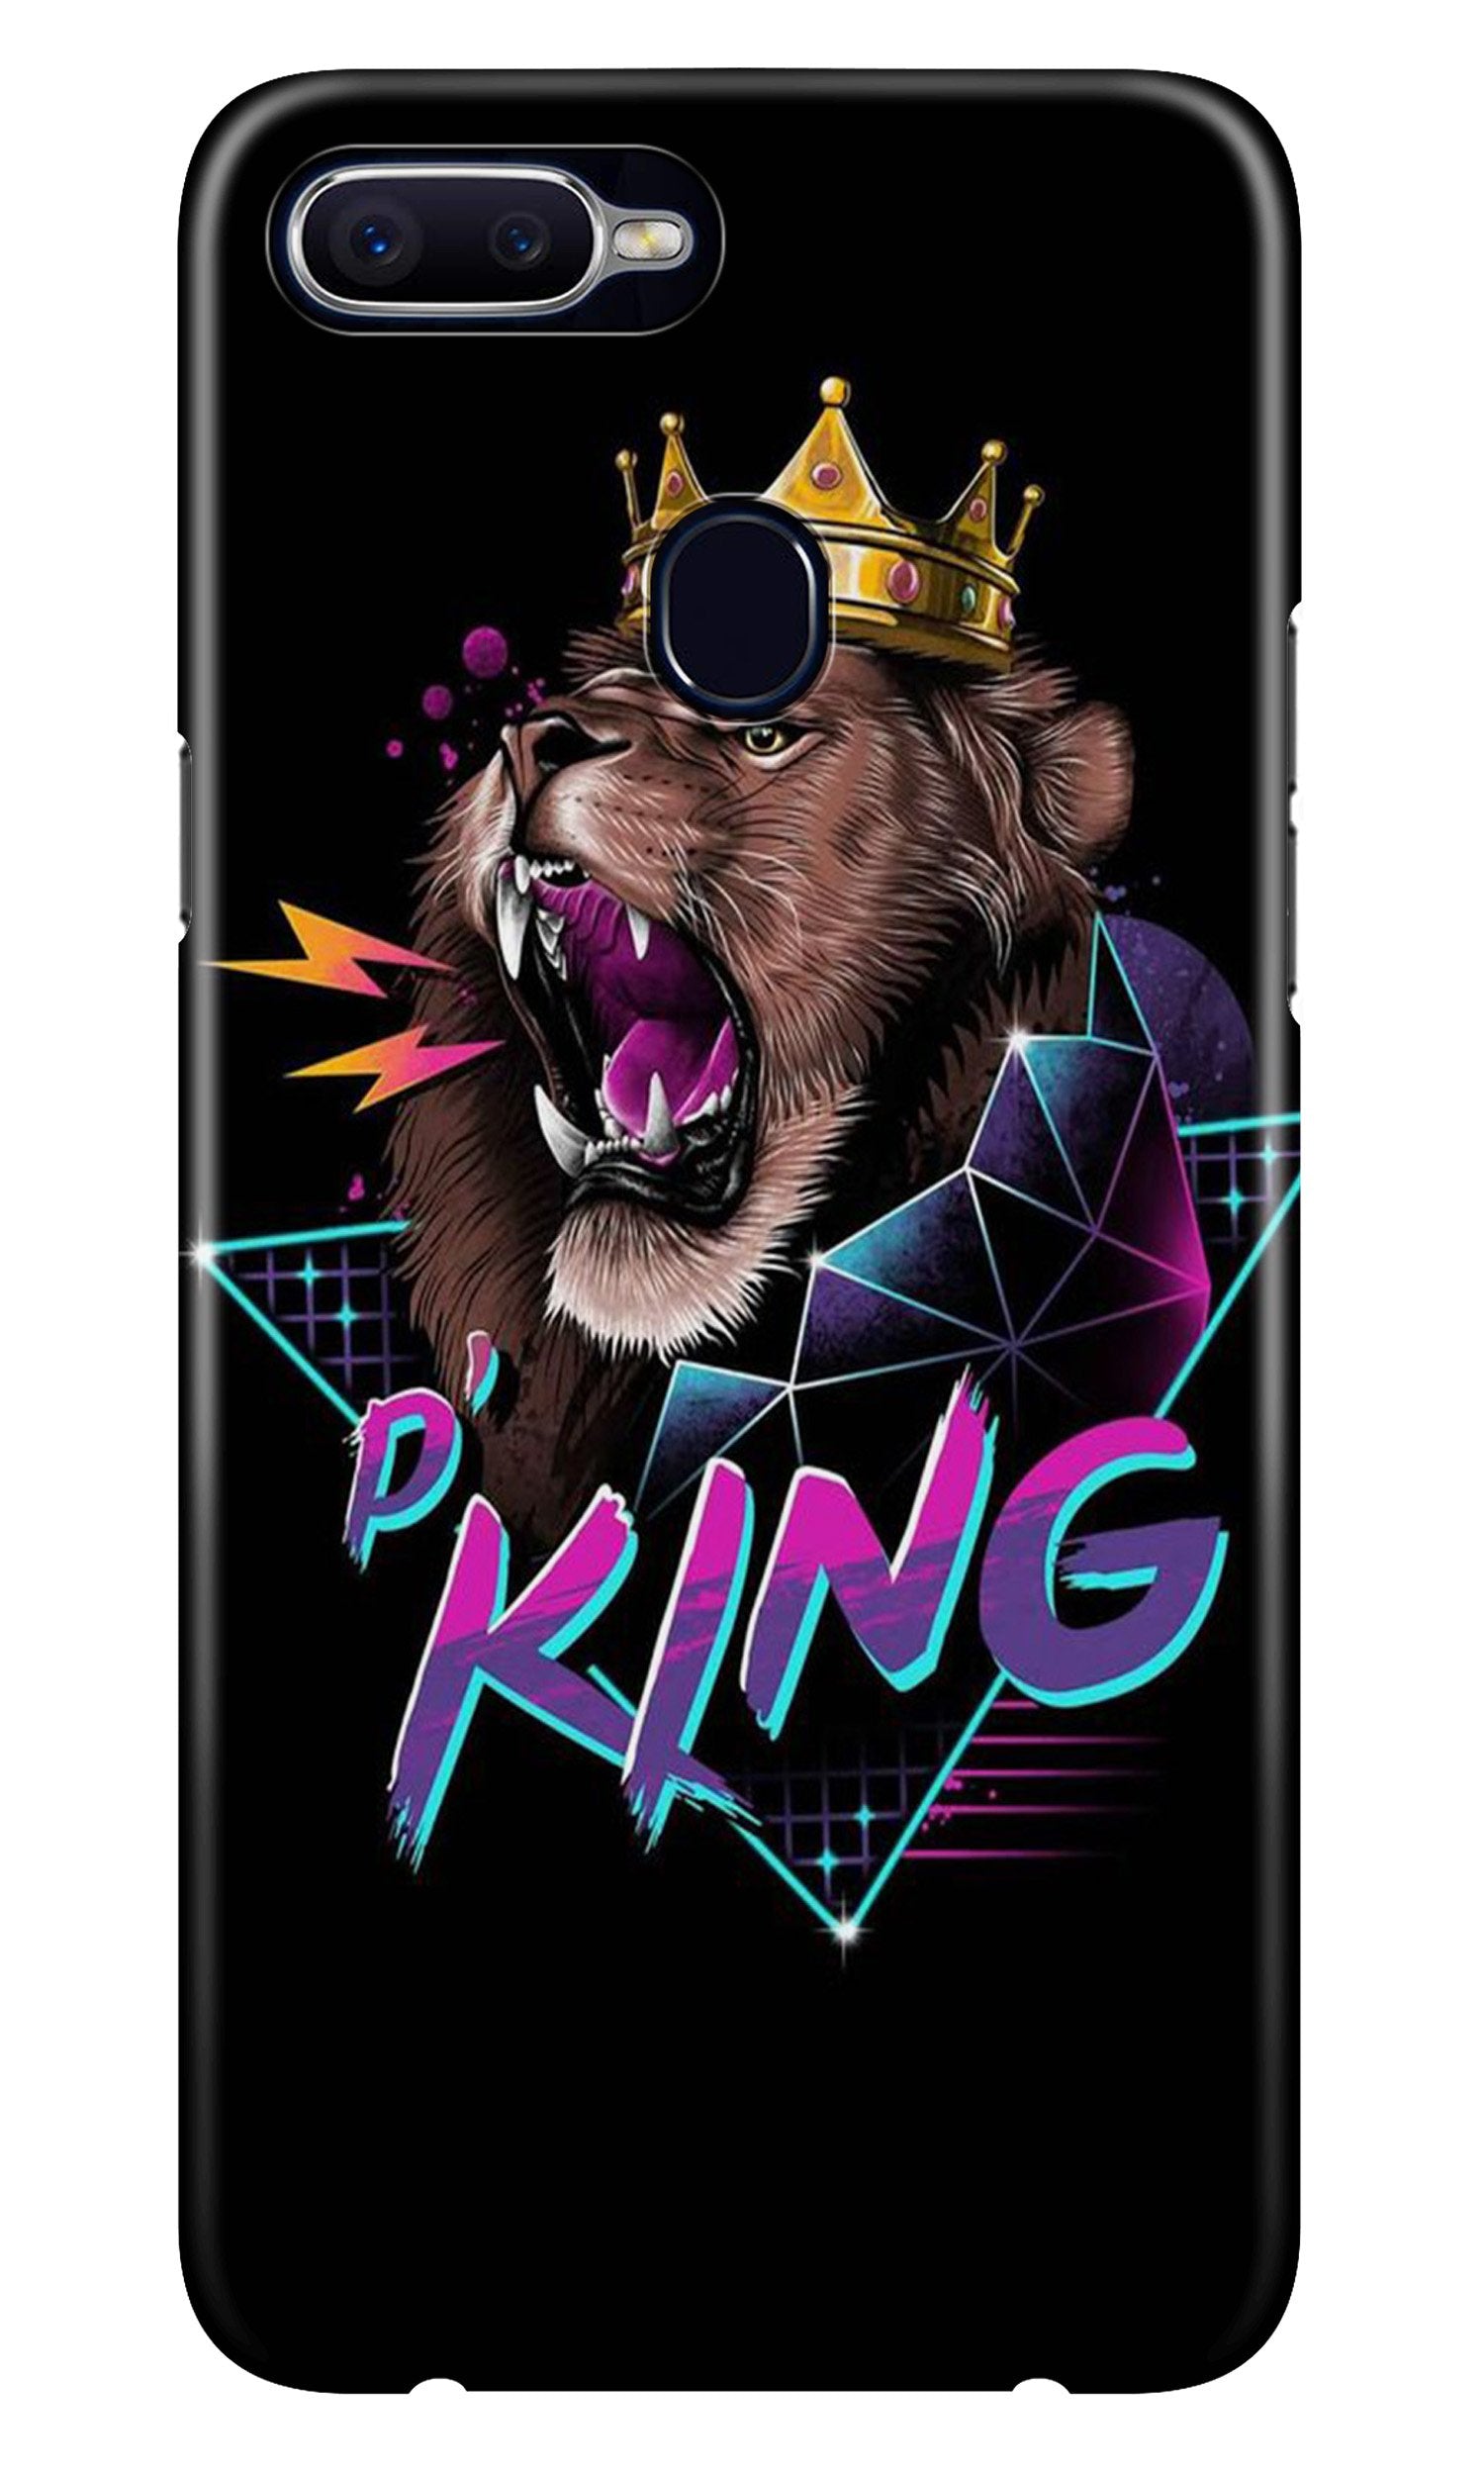 Lion King Case for Oppo A7 (Design No. 219)